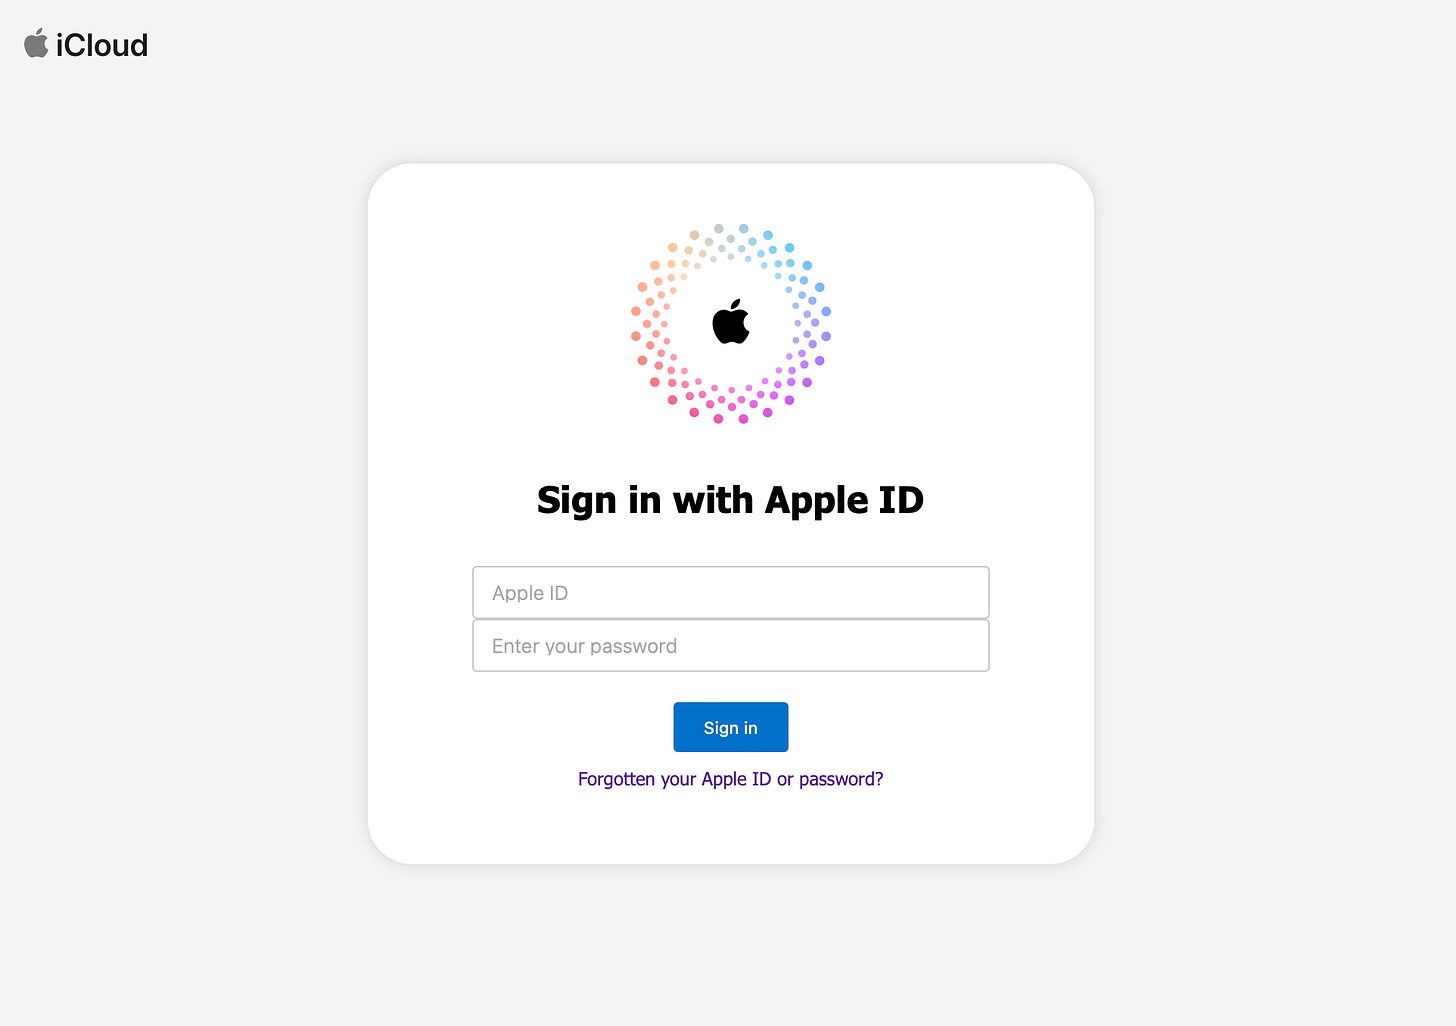 a more realistic fake login page